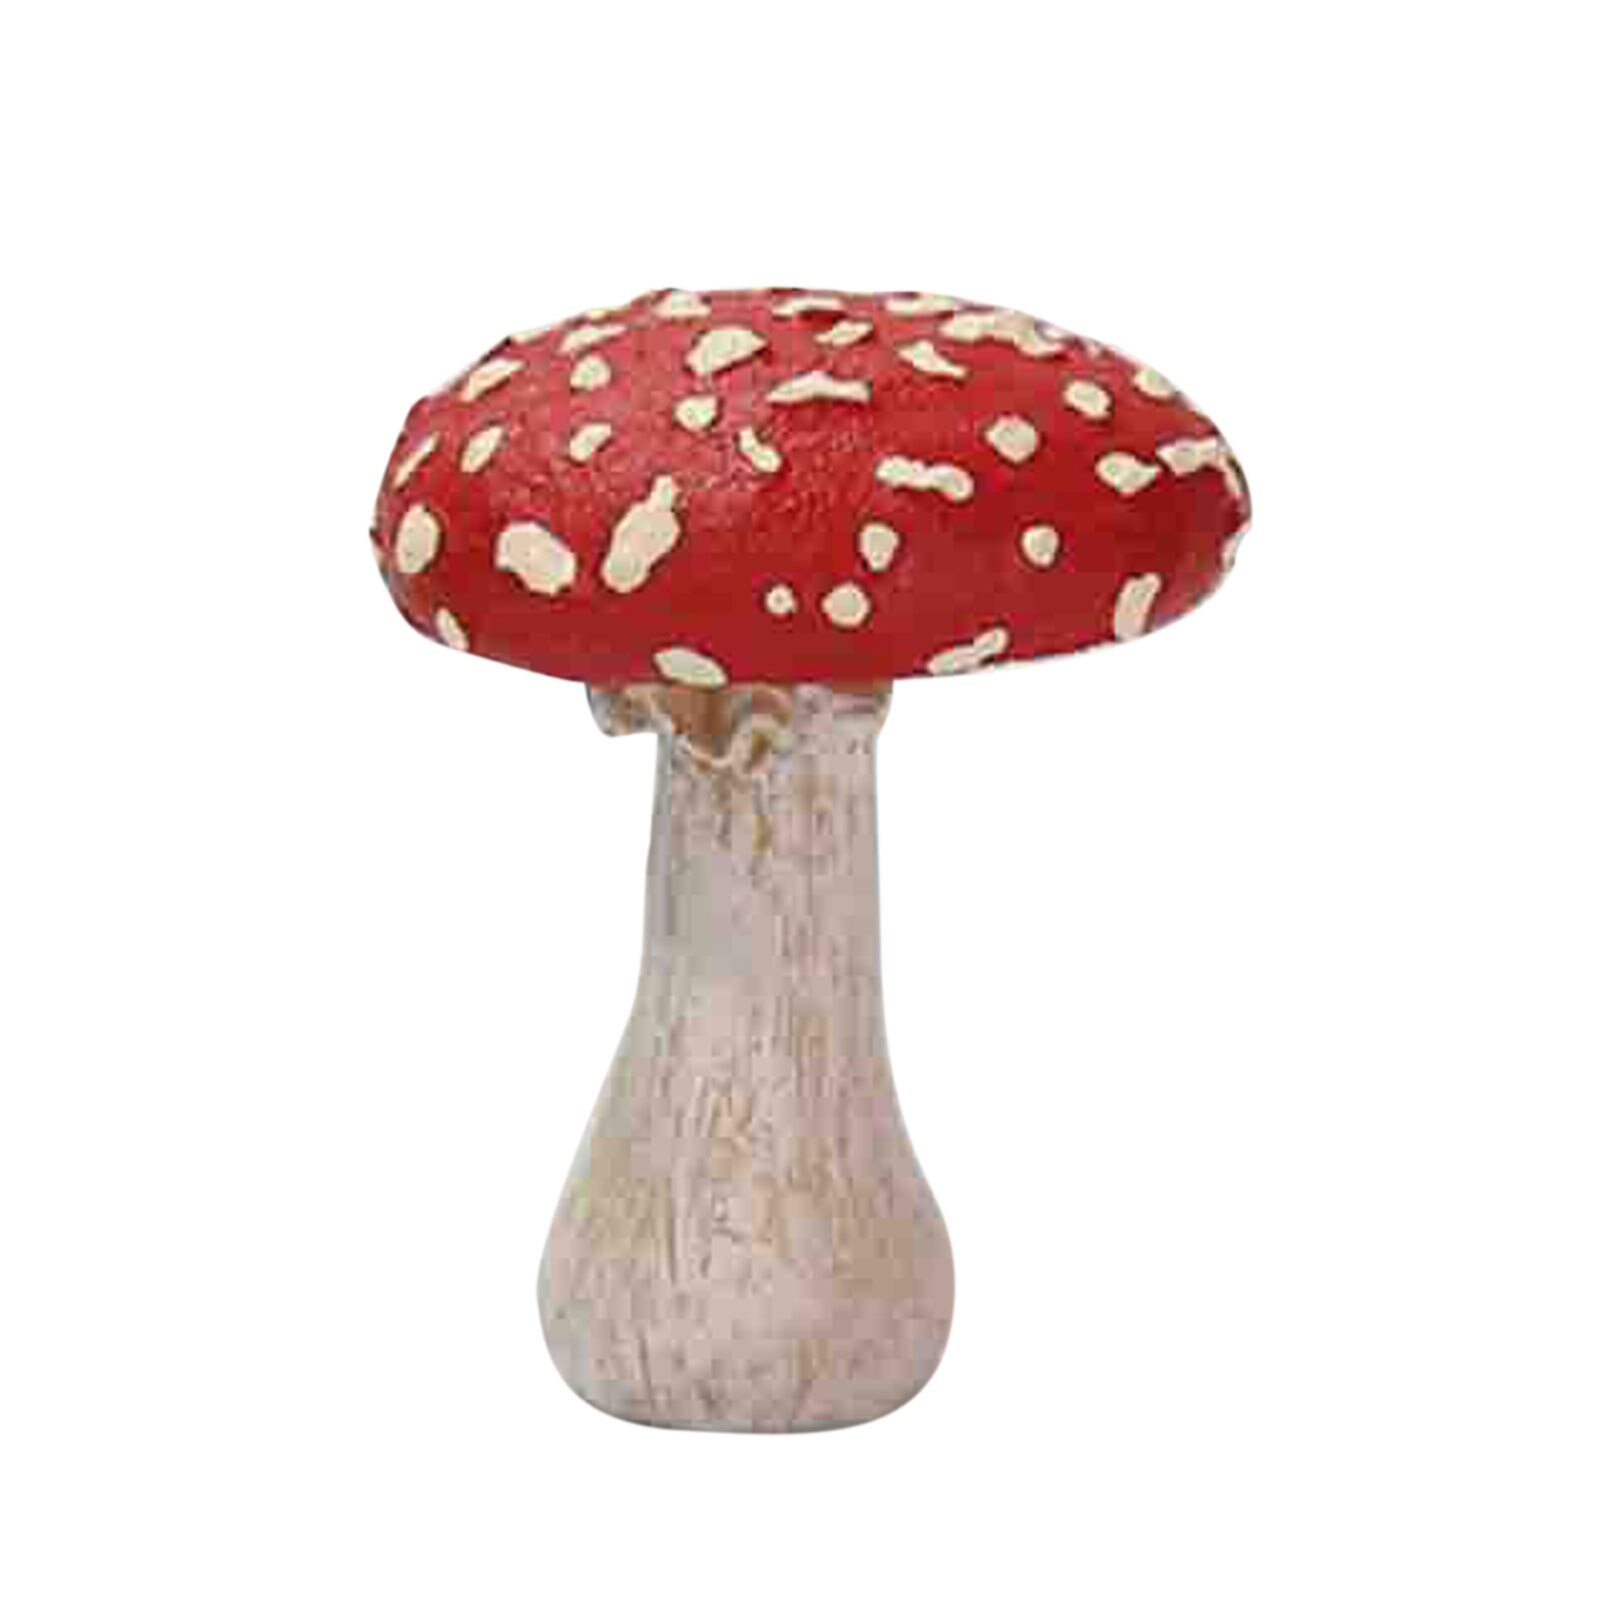 Simulation Resin Mushroom Garden Decoration Mushroom Statue perfect for home lawn or garden exquisite and compact: White